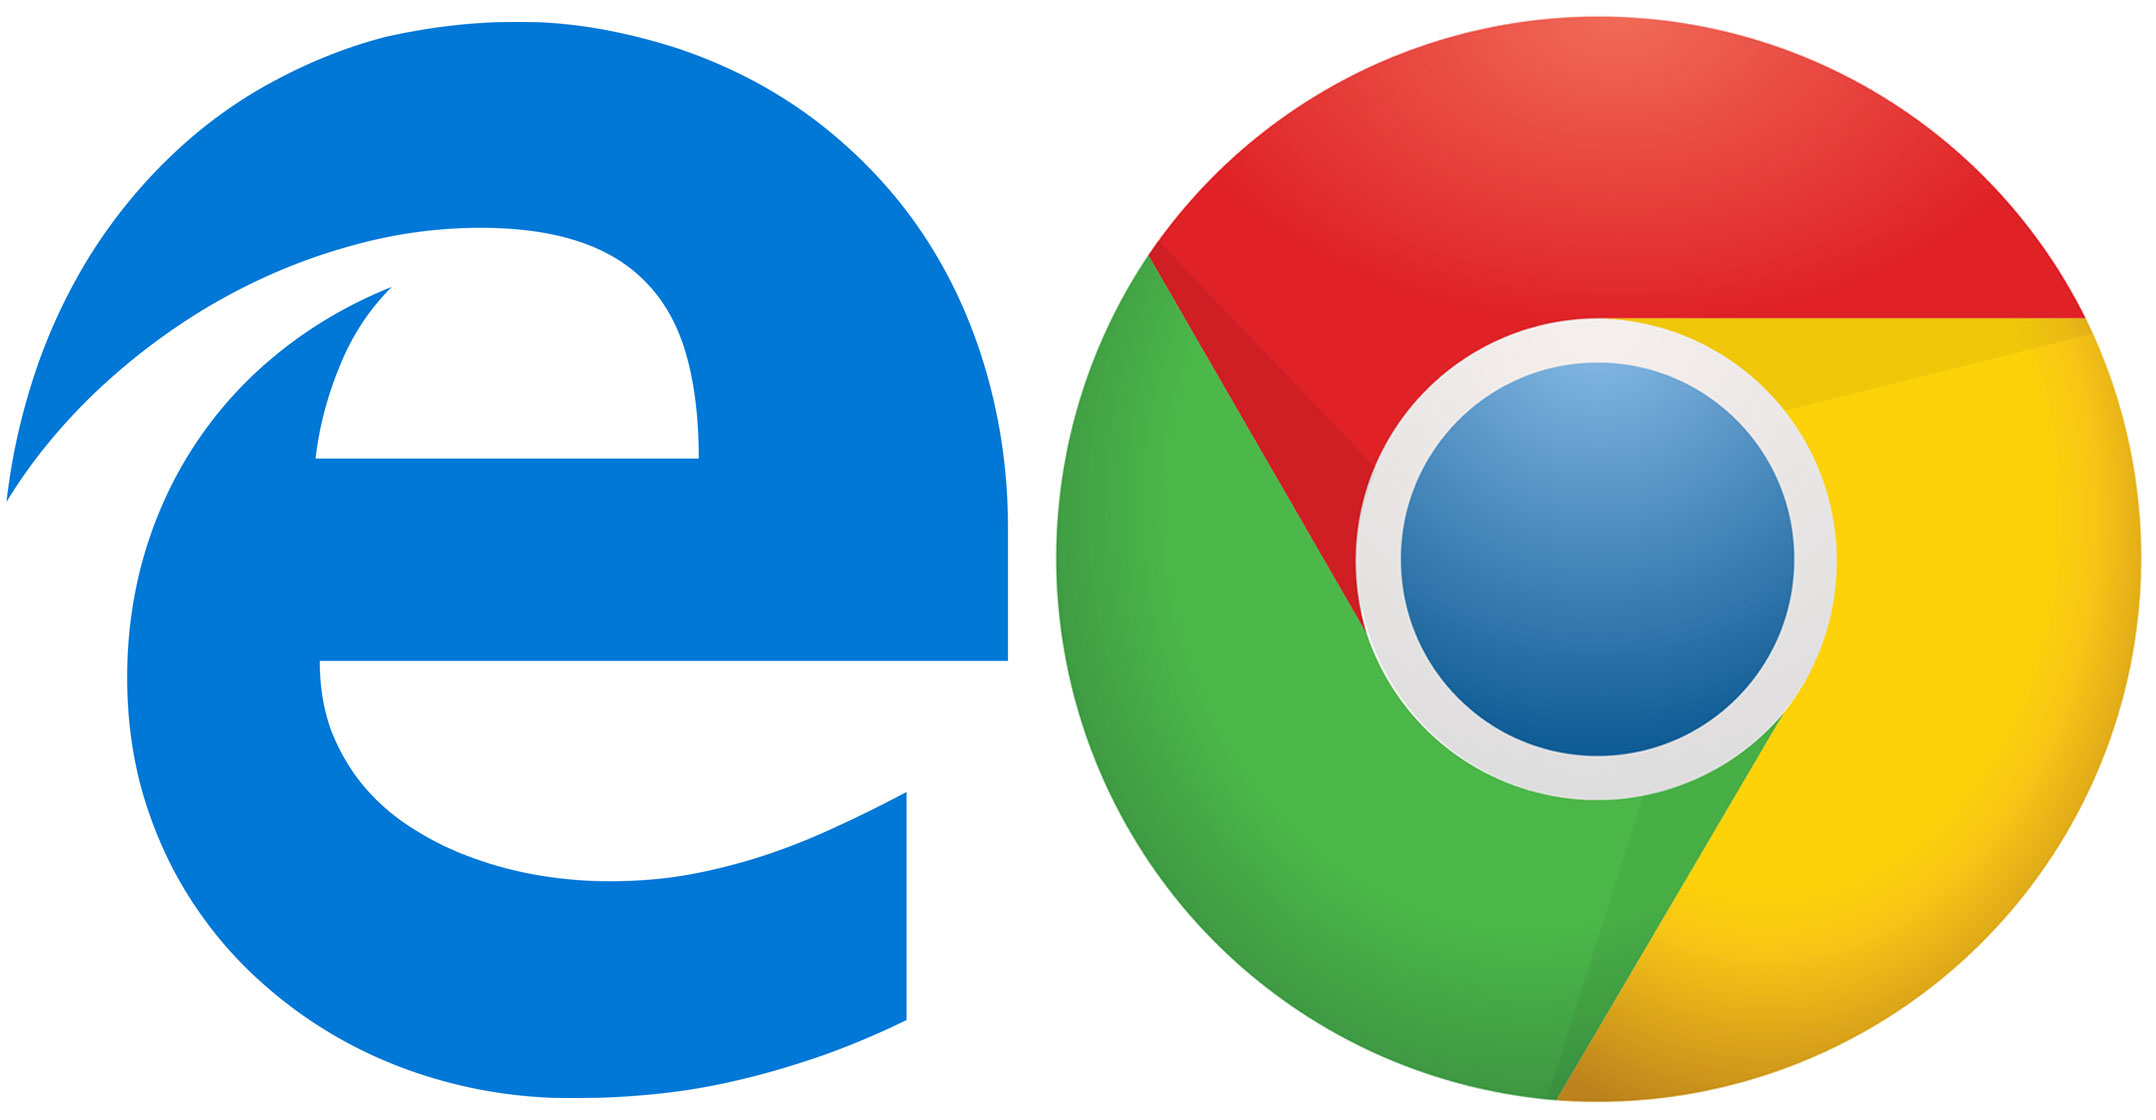 Microsoft to rebuild Edge with Chrome technology - TechCentral